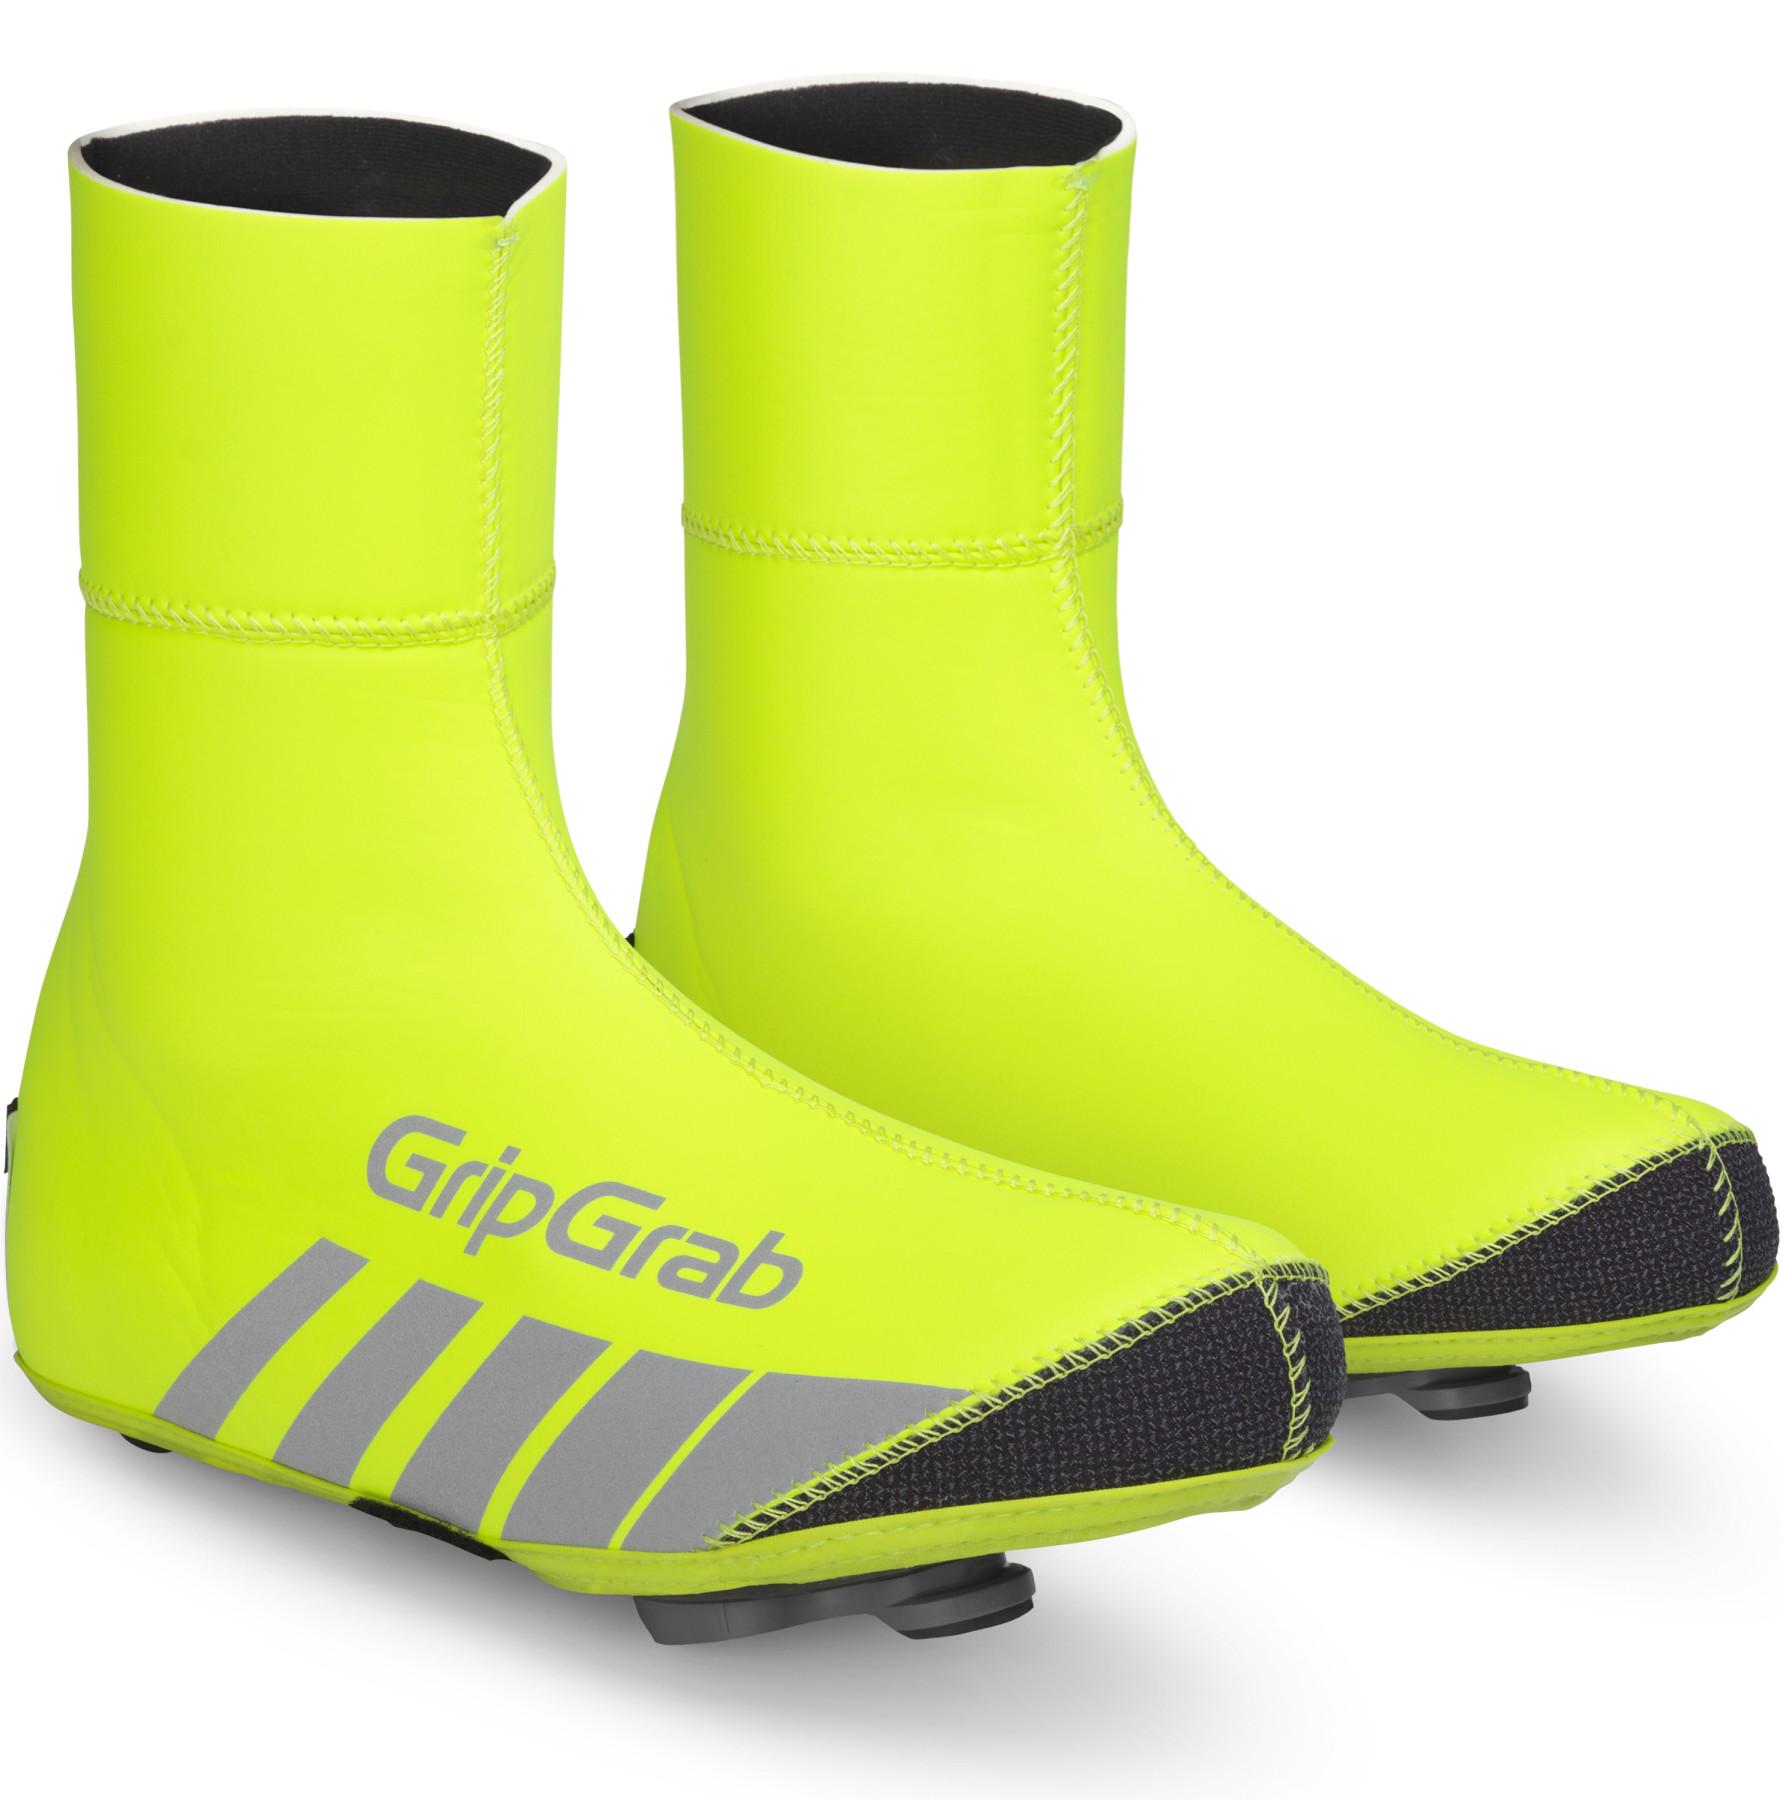 Gripgrab Hi Vis Racethermo Overshoes - Fluorescent Yellow